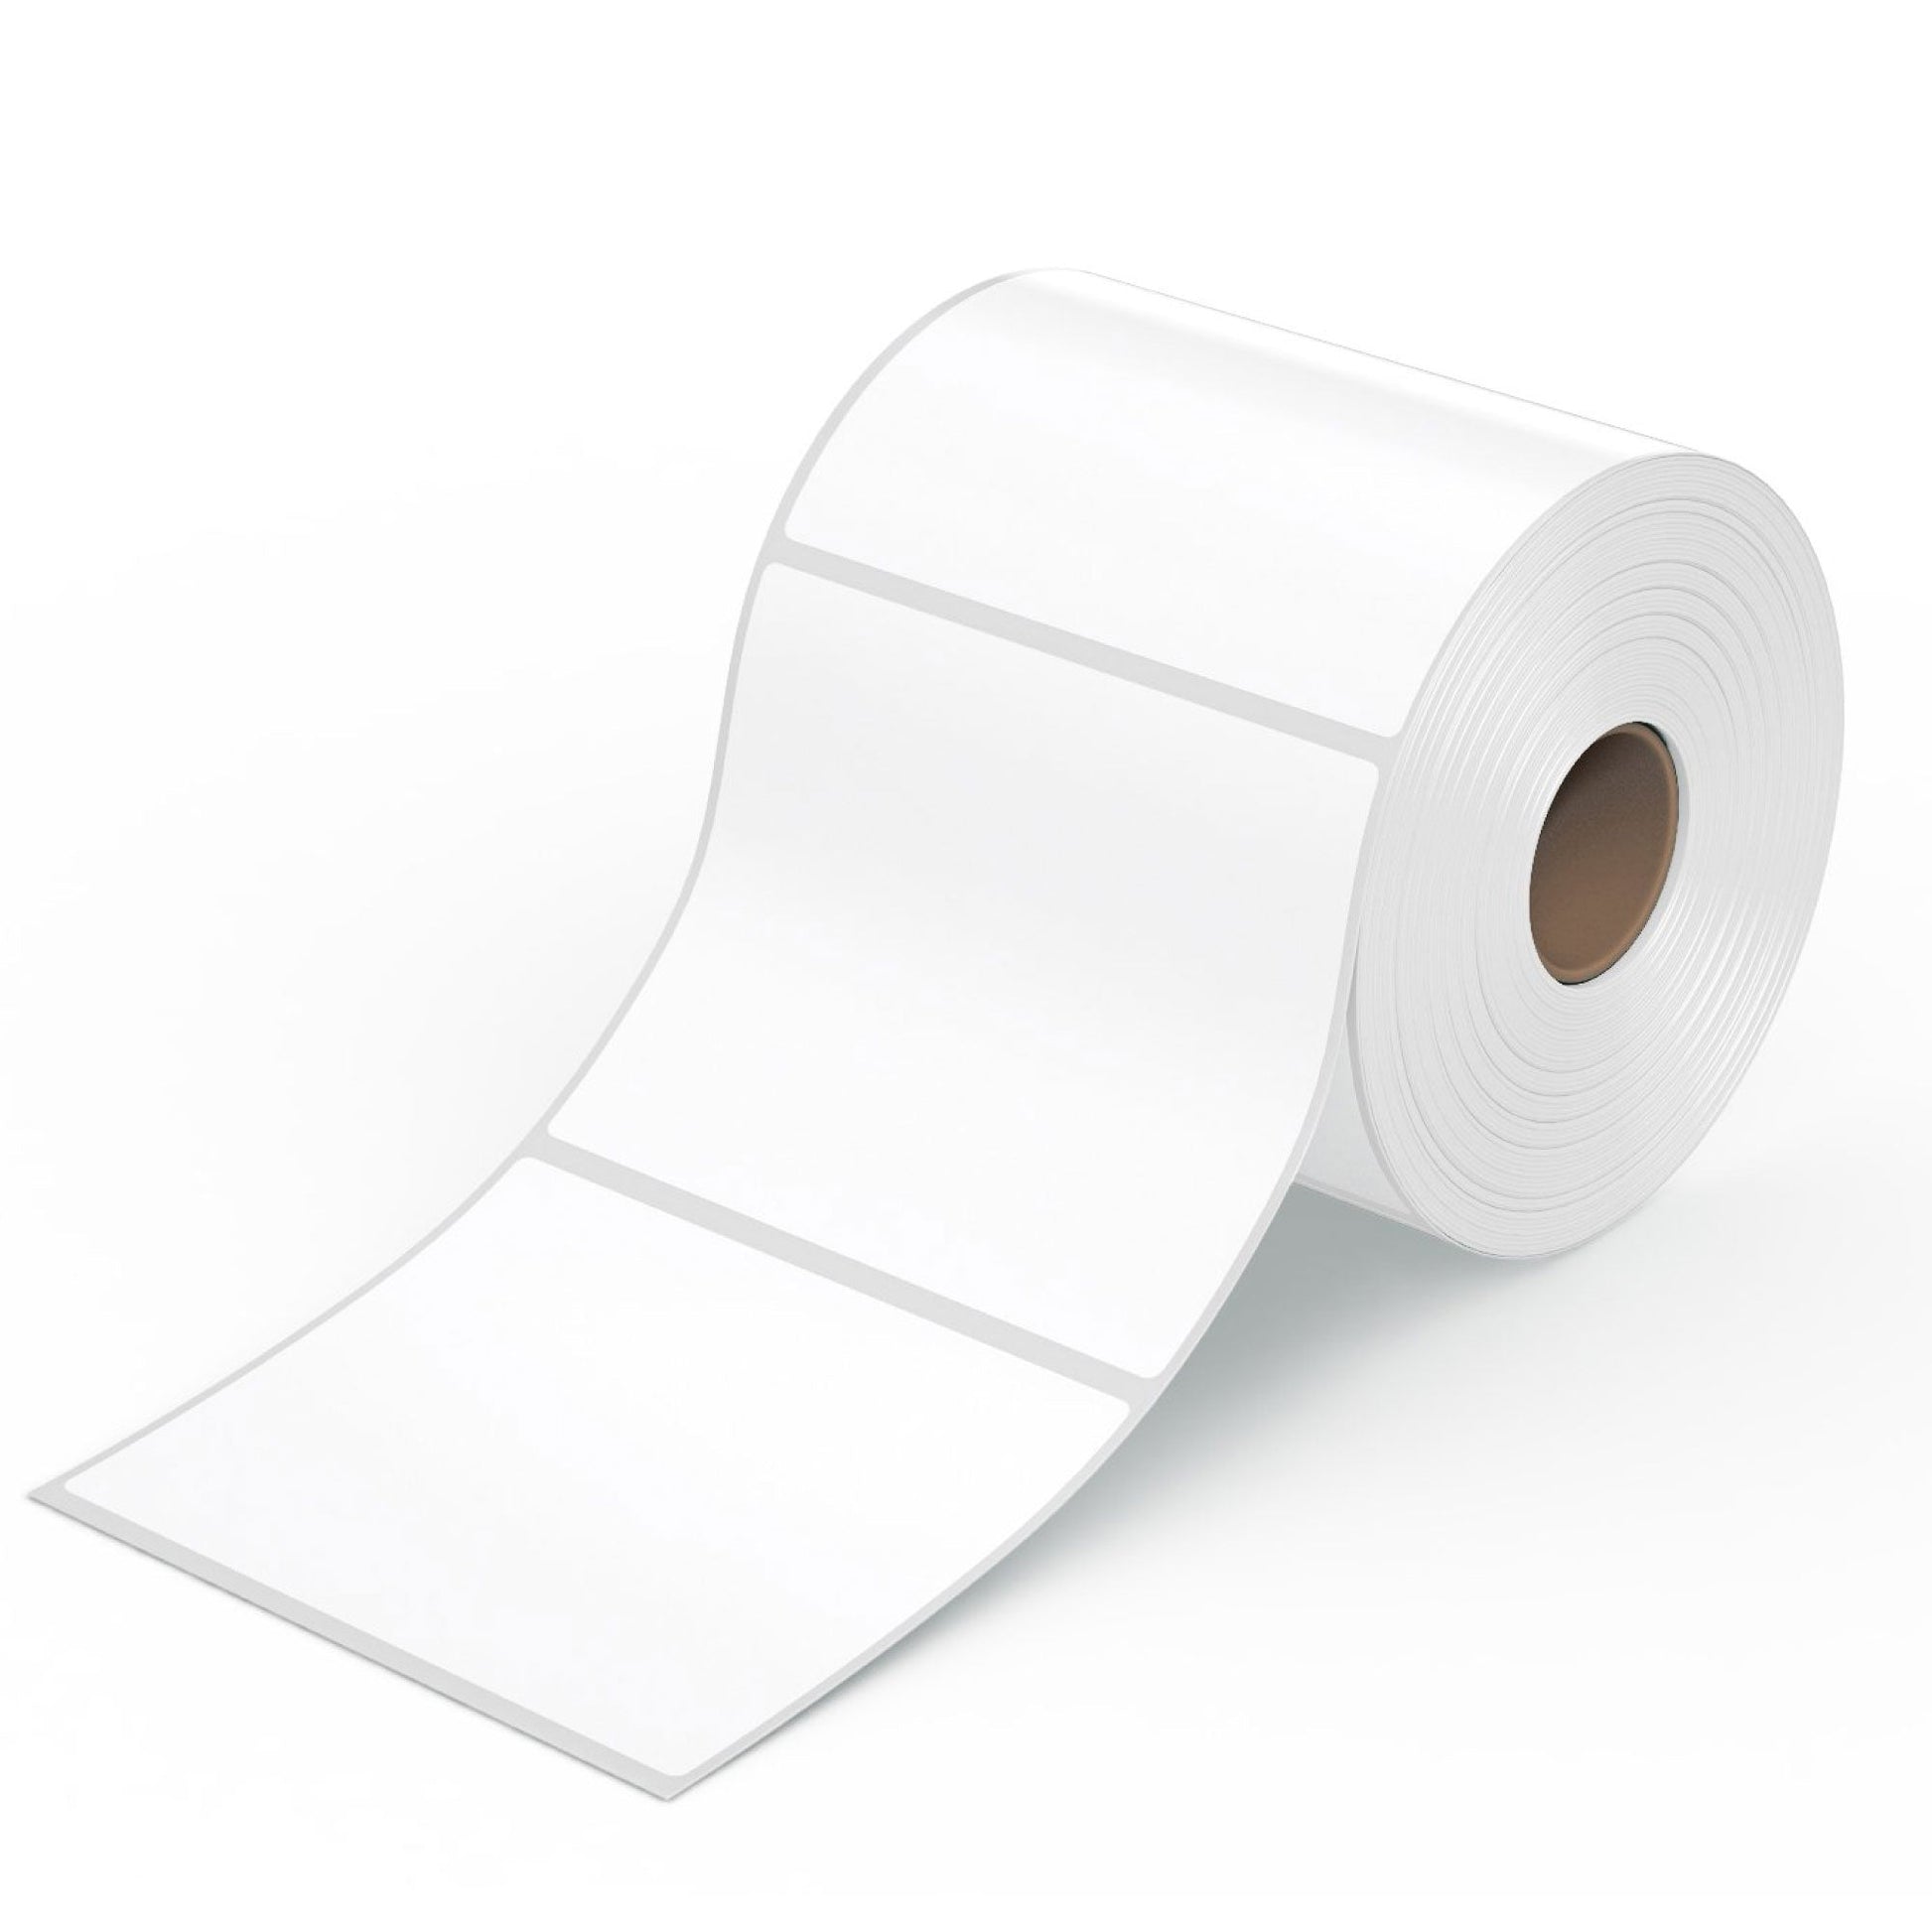 13x Rolls x 400 Label Stickers 102x150mm - Direct Thermal White Shipping Labels